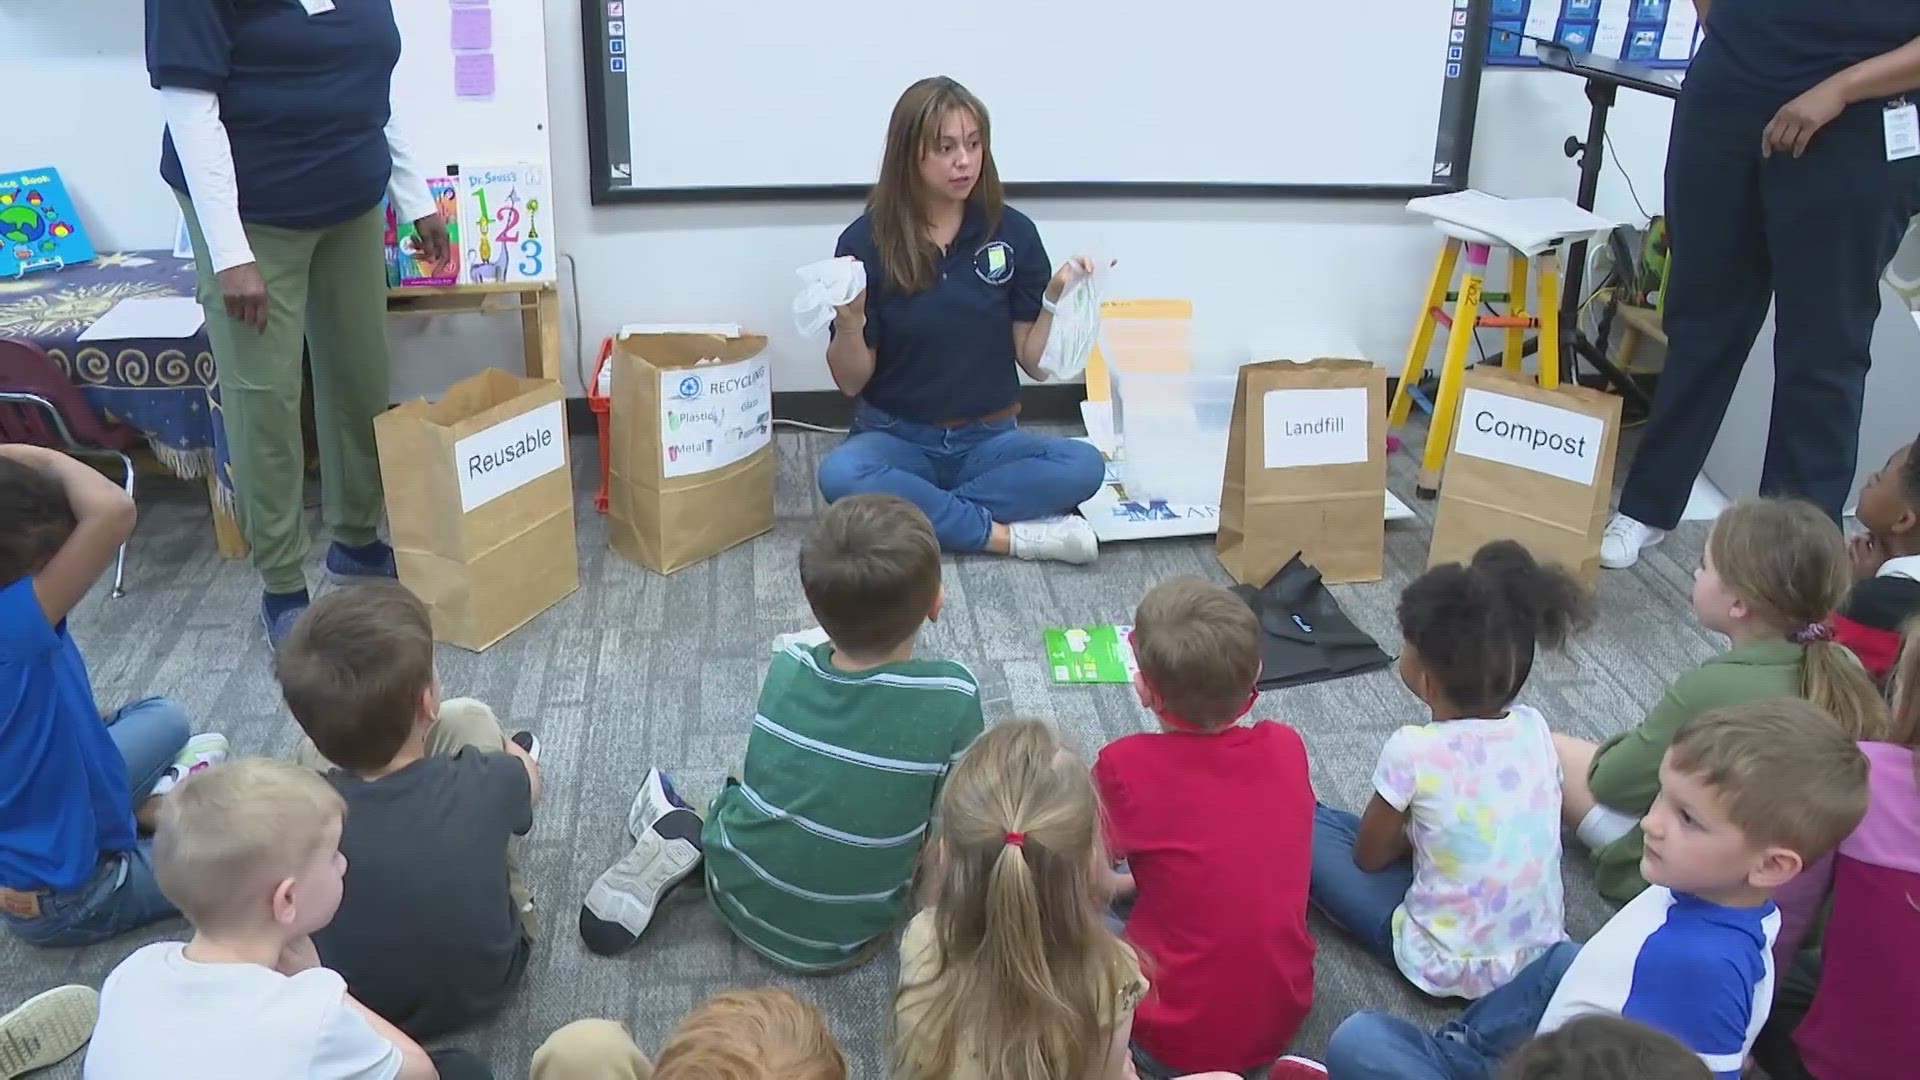 While they do presentations year-round teaching young Hoosiers about recycling, composting, and air/water quality, they make a big push during April.